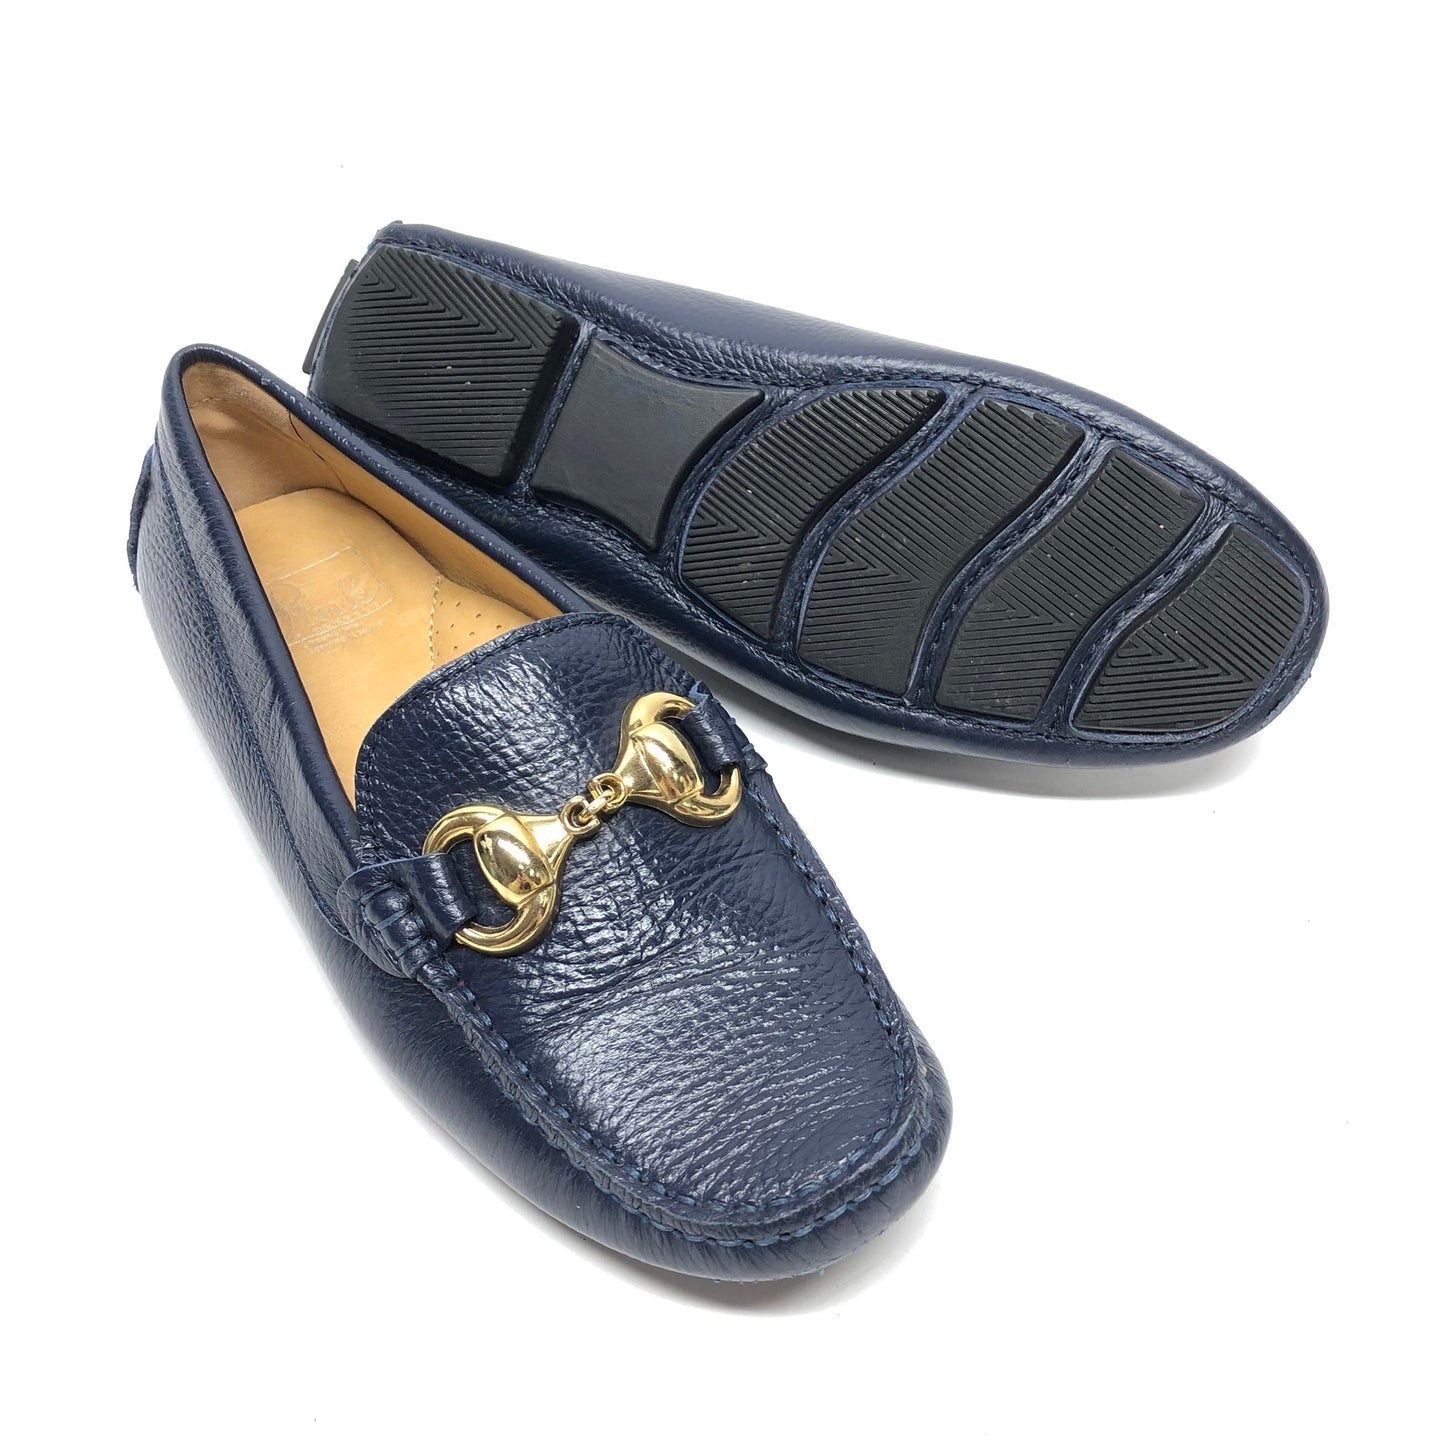 Shoes Flats Loafer Oxford By Cmc  Size: 6